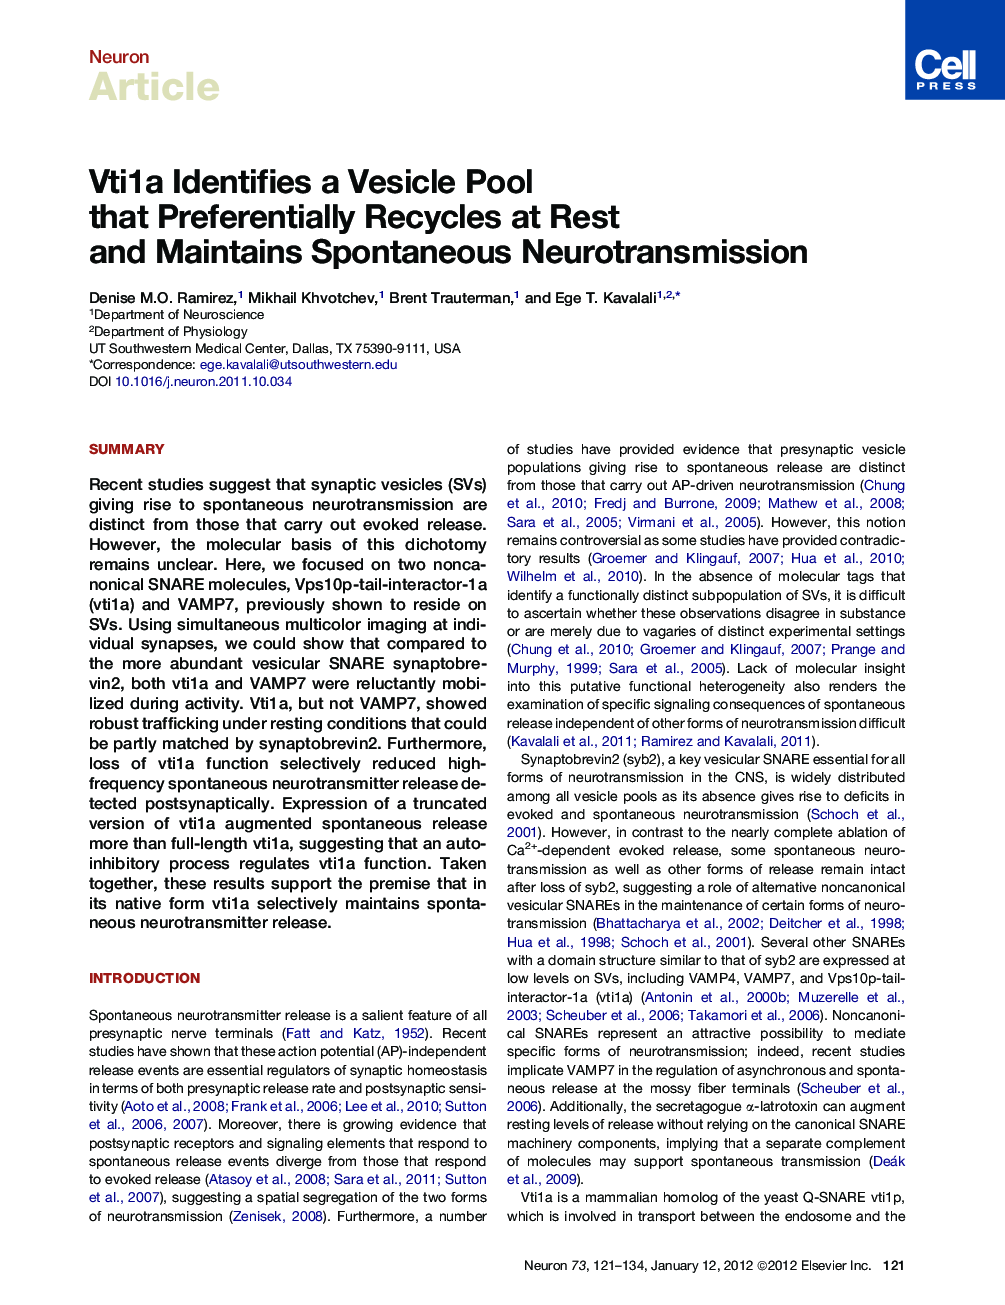 Vti1a Identifies a Vesicle Pool that Preferentially Recycles at Rest and Maintains Spontaneous Neurotransmission